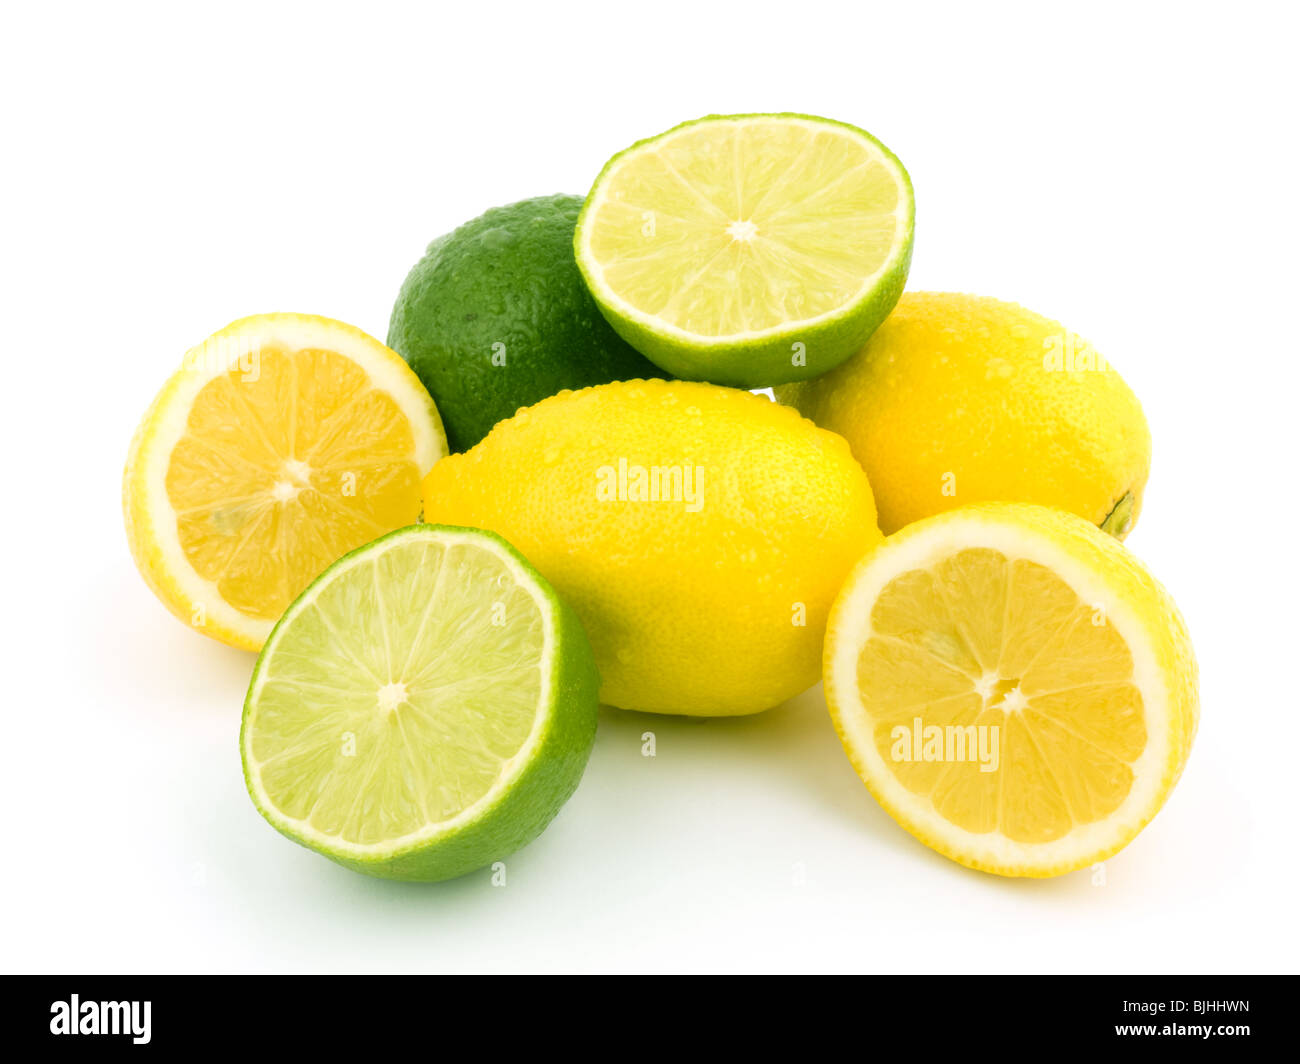 Lemons and limes on white background. Stock Photo